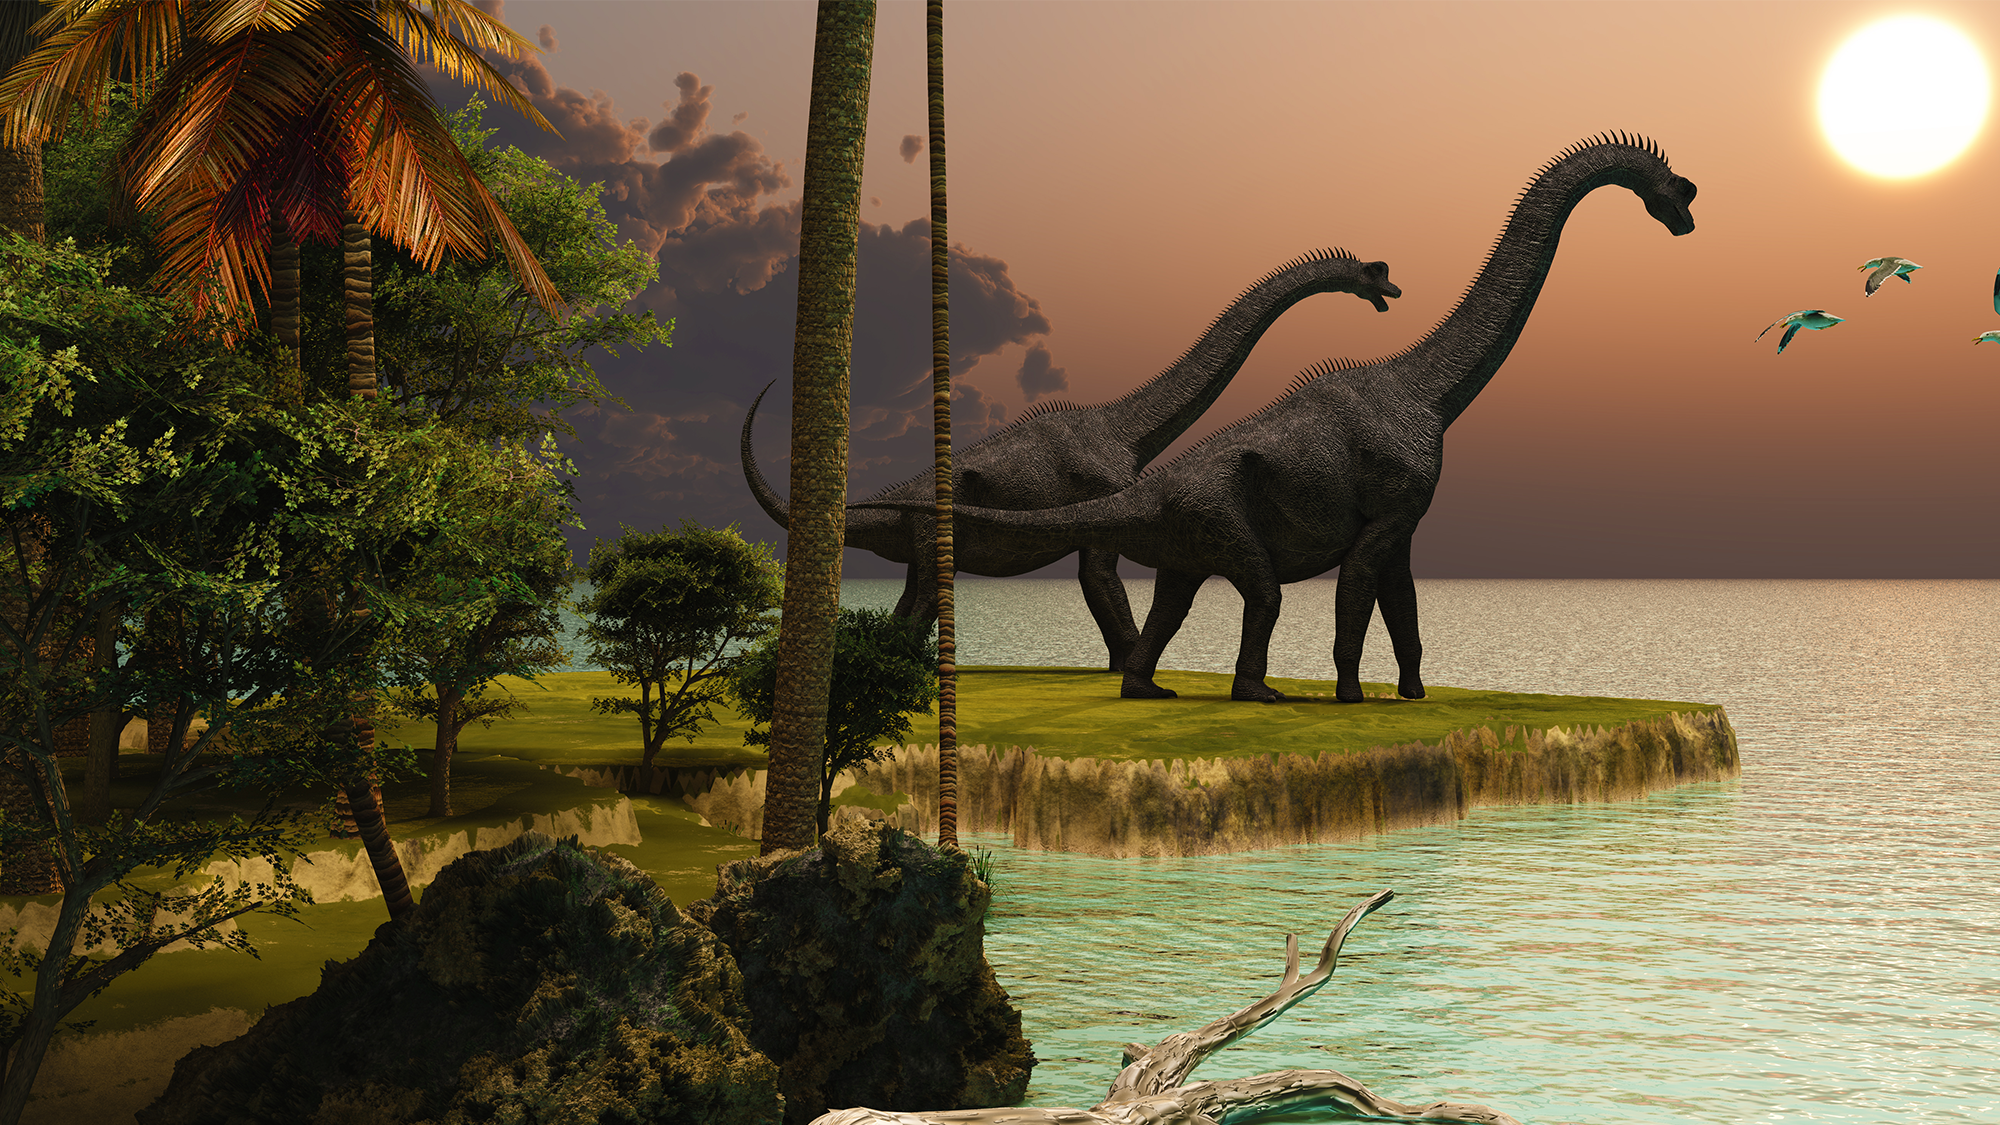 Two sauropods in the sunset.